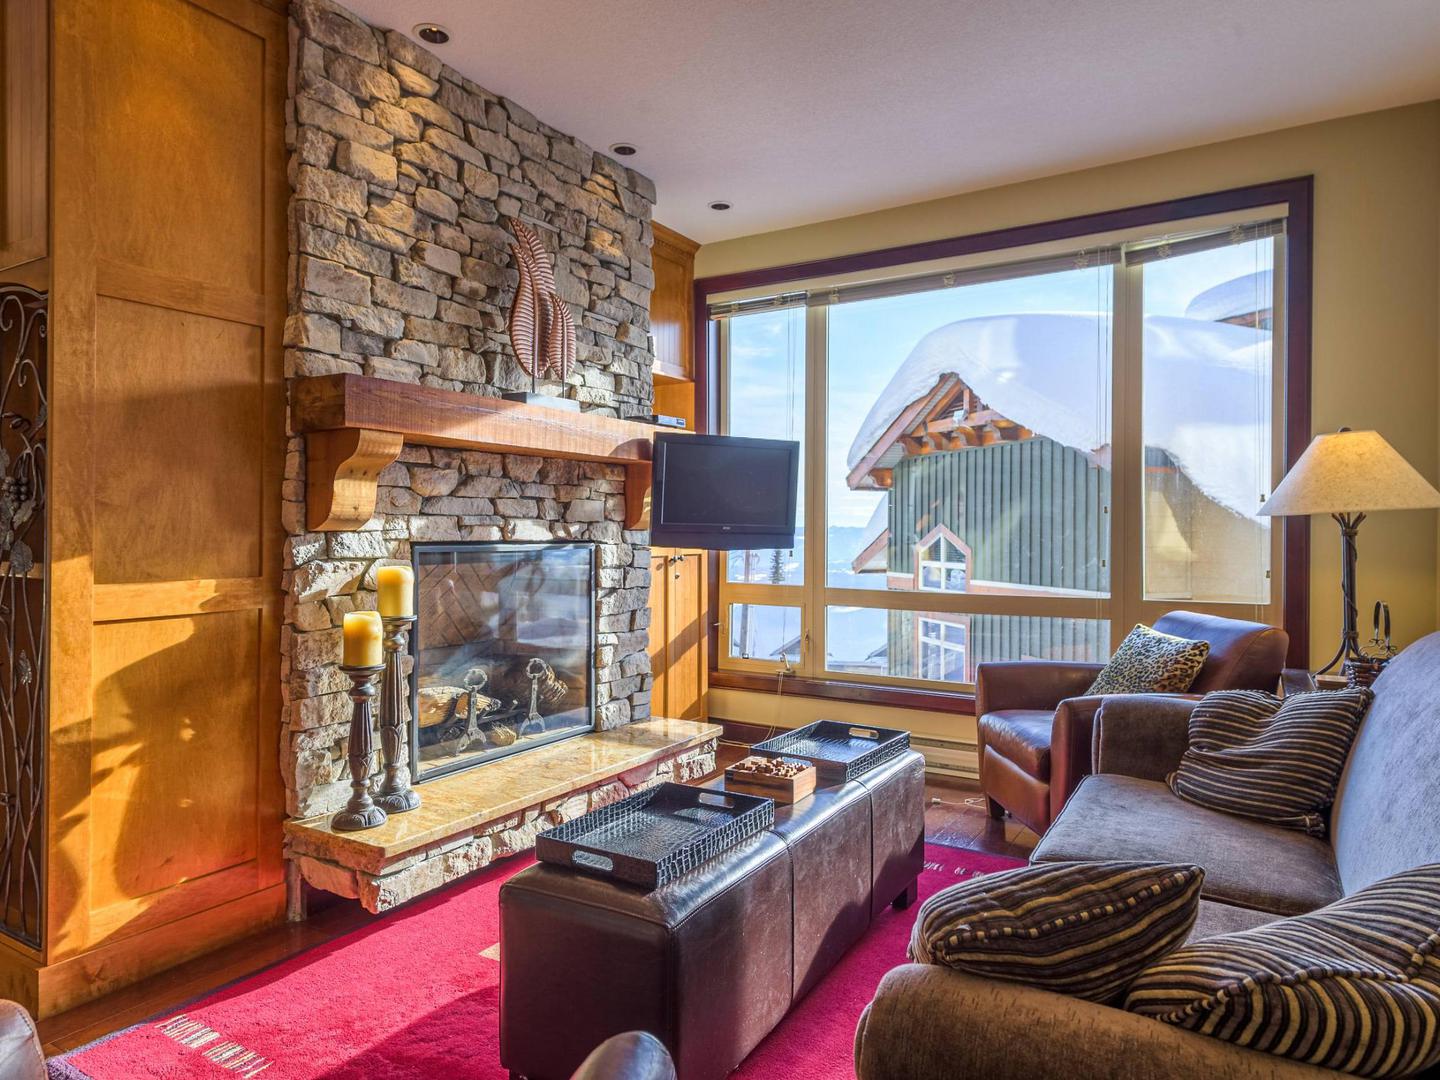 Aspens 201's cozy living room with a comfortable couch, stone fireplace and bright warm light from the floor to ceiling windows, a luxury vacation rental condo managed by Luxury Mountain Vacation Rentals at Big White Ski Resort